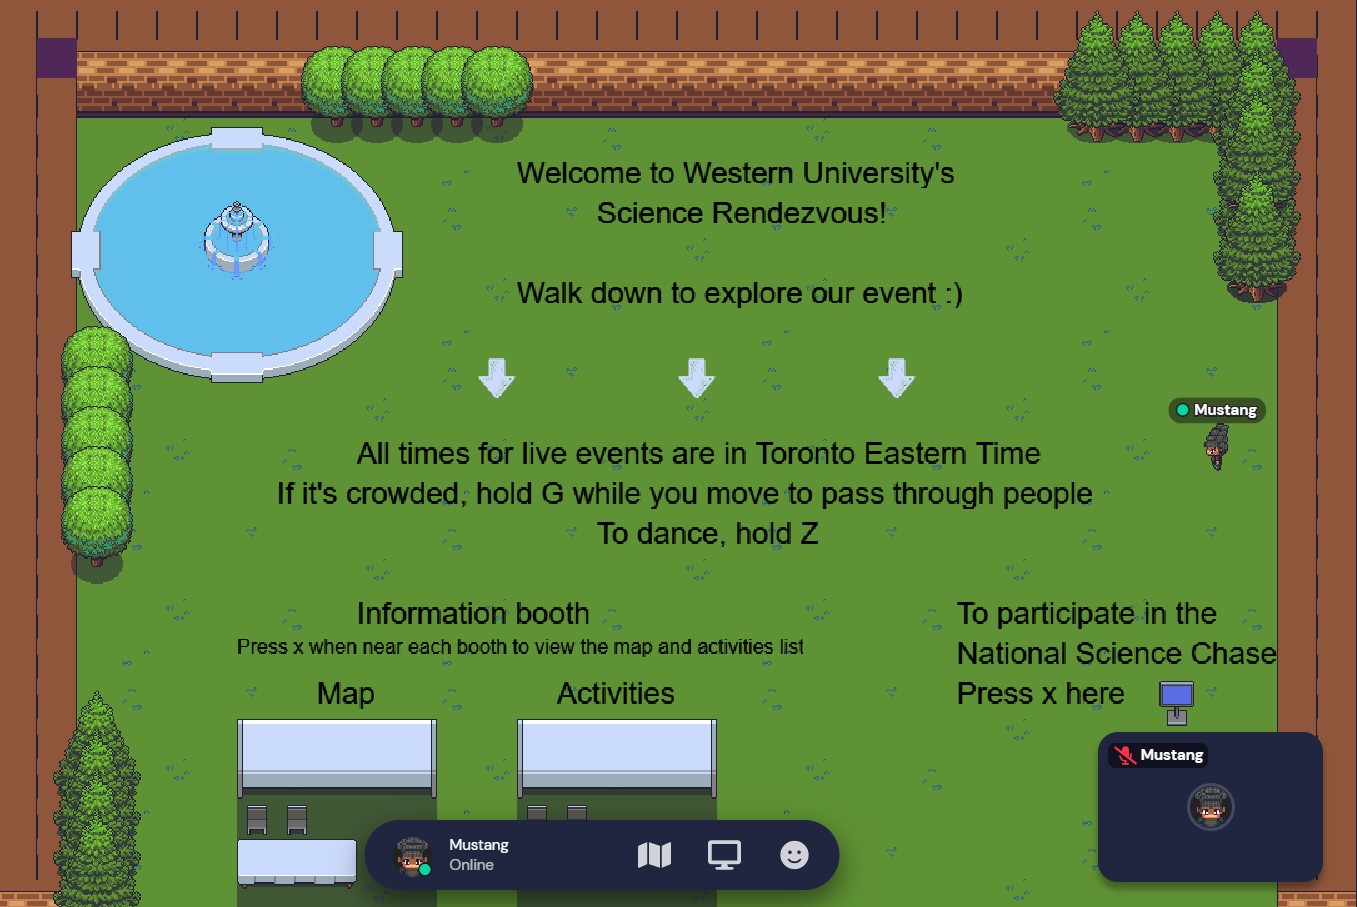 Computer screenshot showing a virtual park, with threes lining the perimeter. Overlaid is the following text: "Welcome to Western University's Science Rendezvous! Walk down to explore our event. All times for live events are in Toronto Easter Time. If it's crowded, hold G while you move to pass through people. To dance, hold Z."